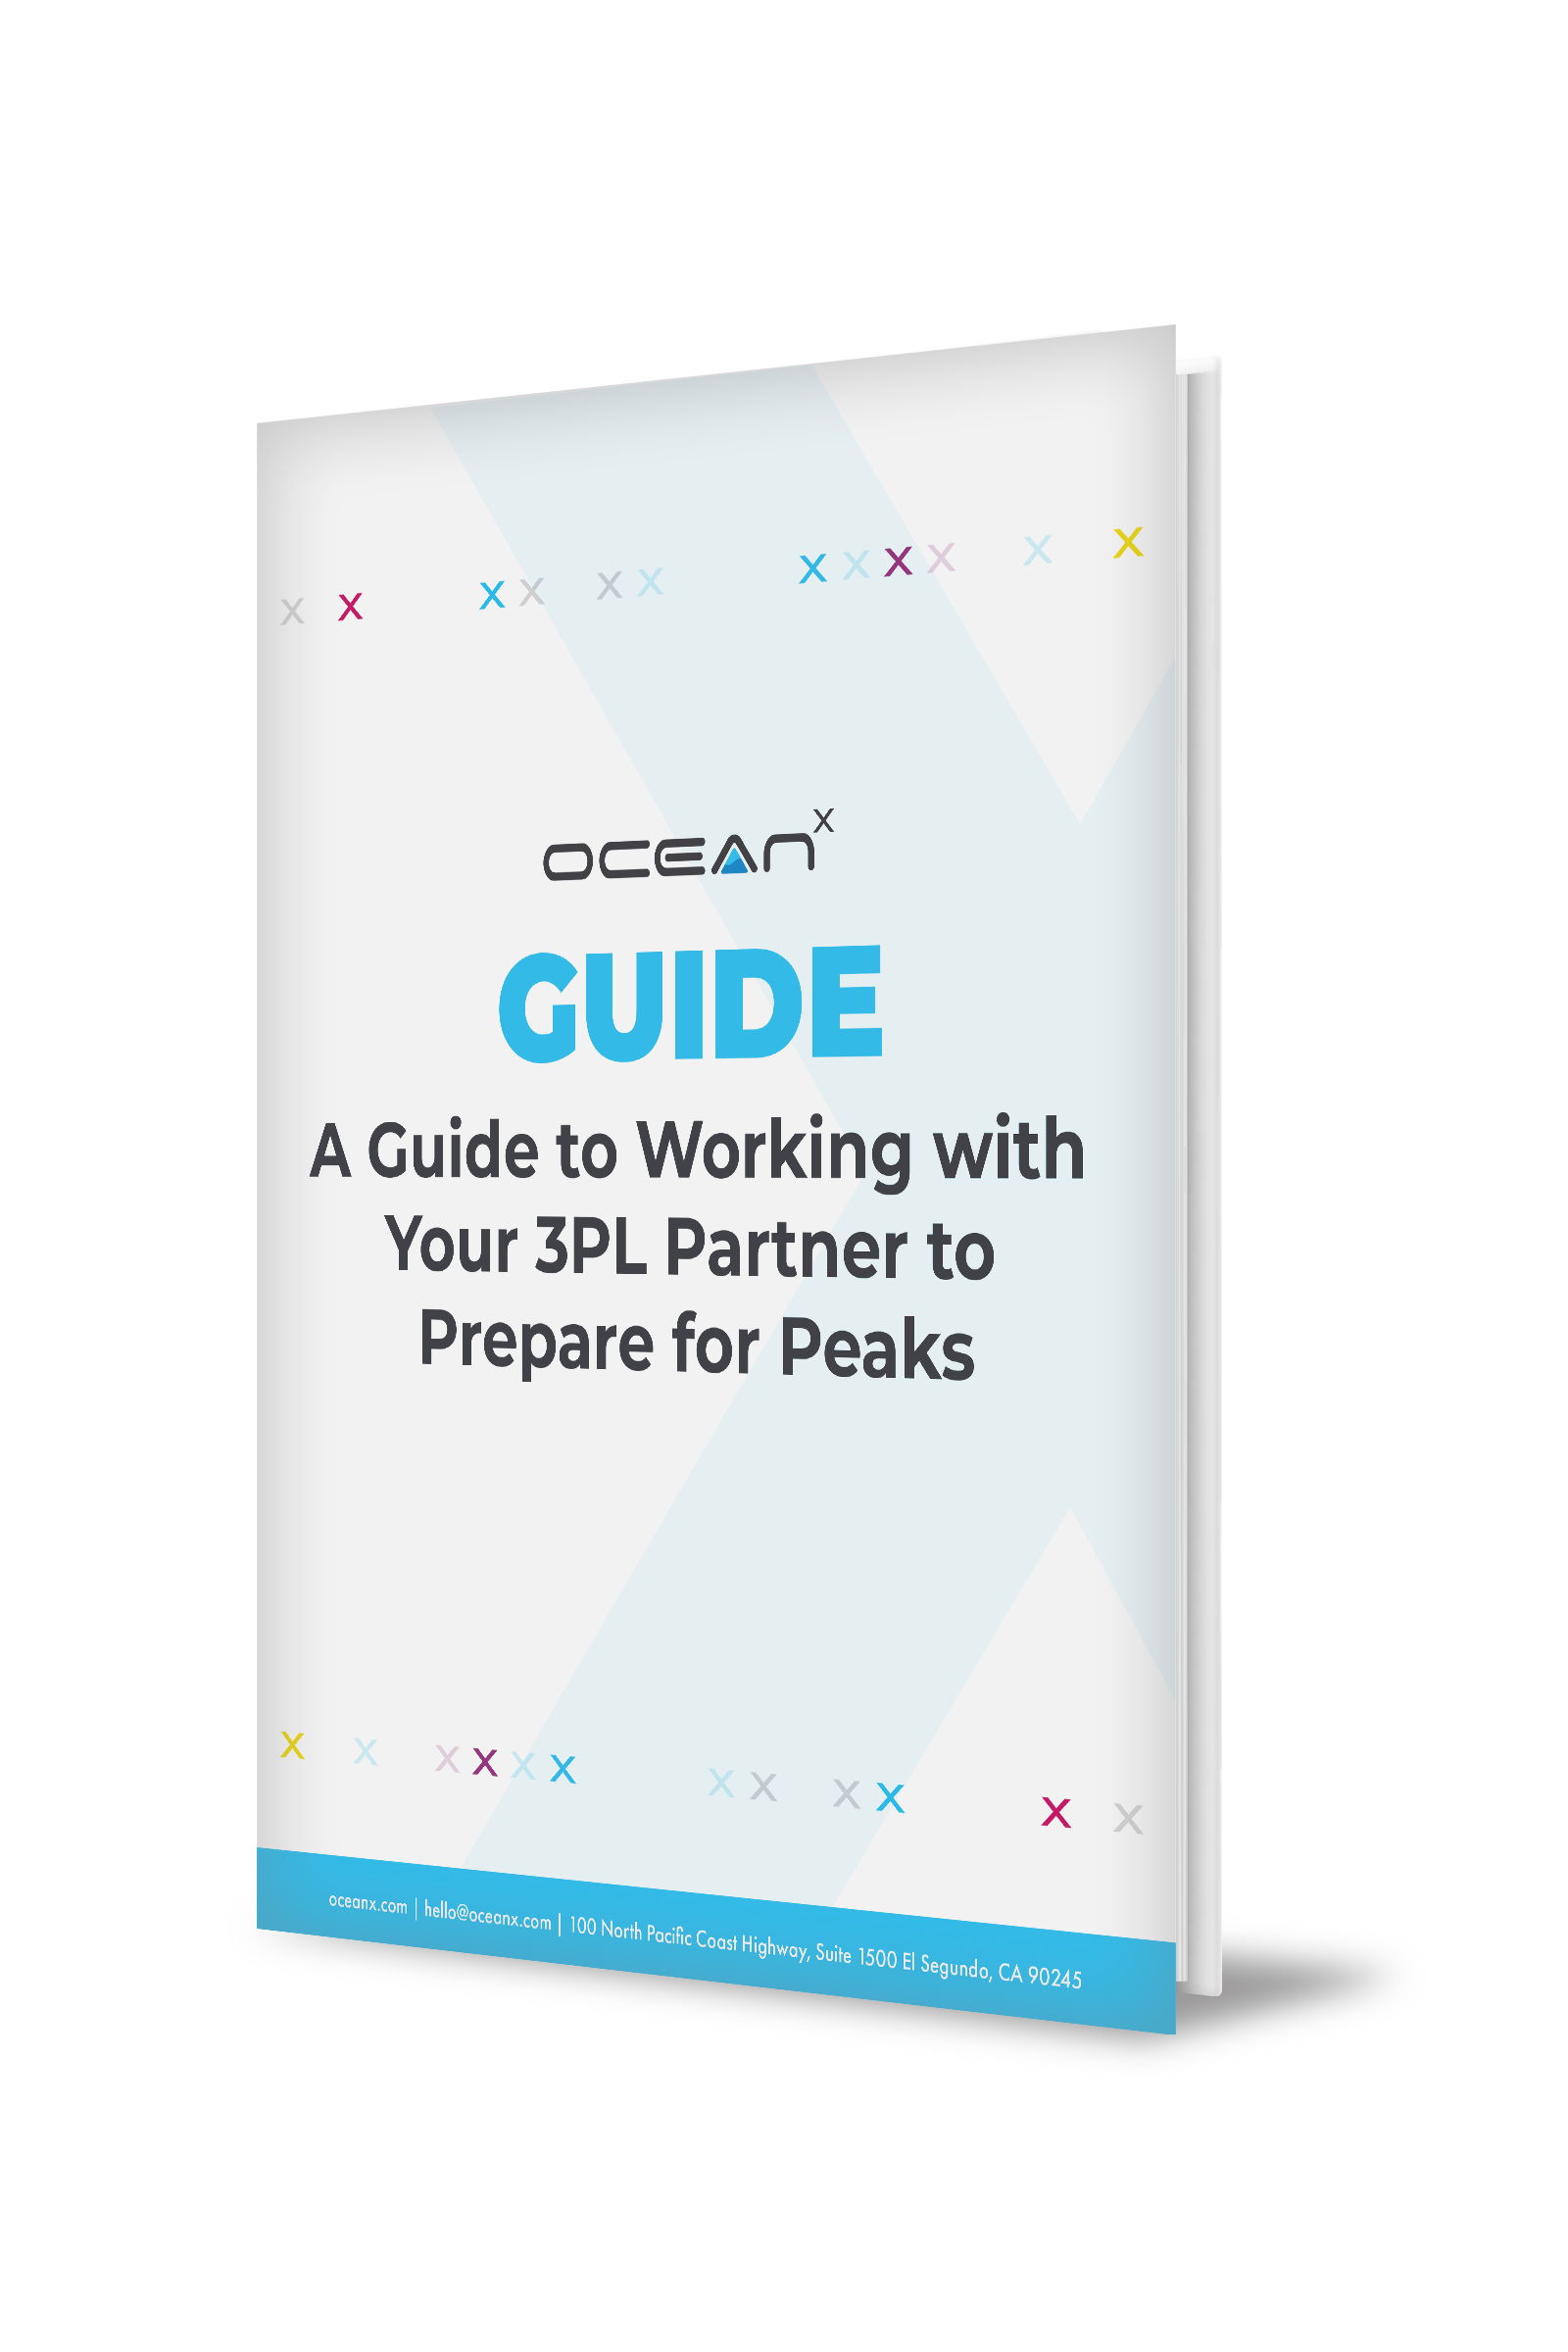 PDF Cover Image (A Guide to Working with Your 3PL Partner to Prepare for Peaks)_02_072921